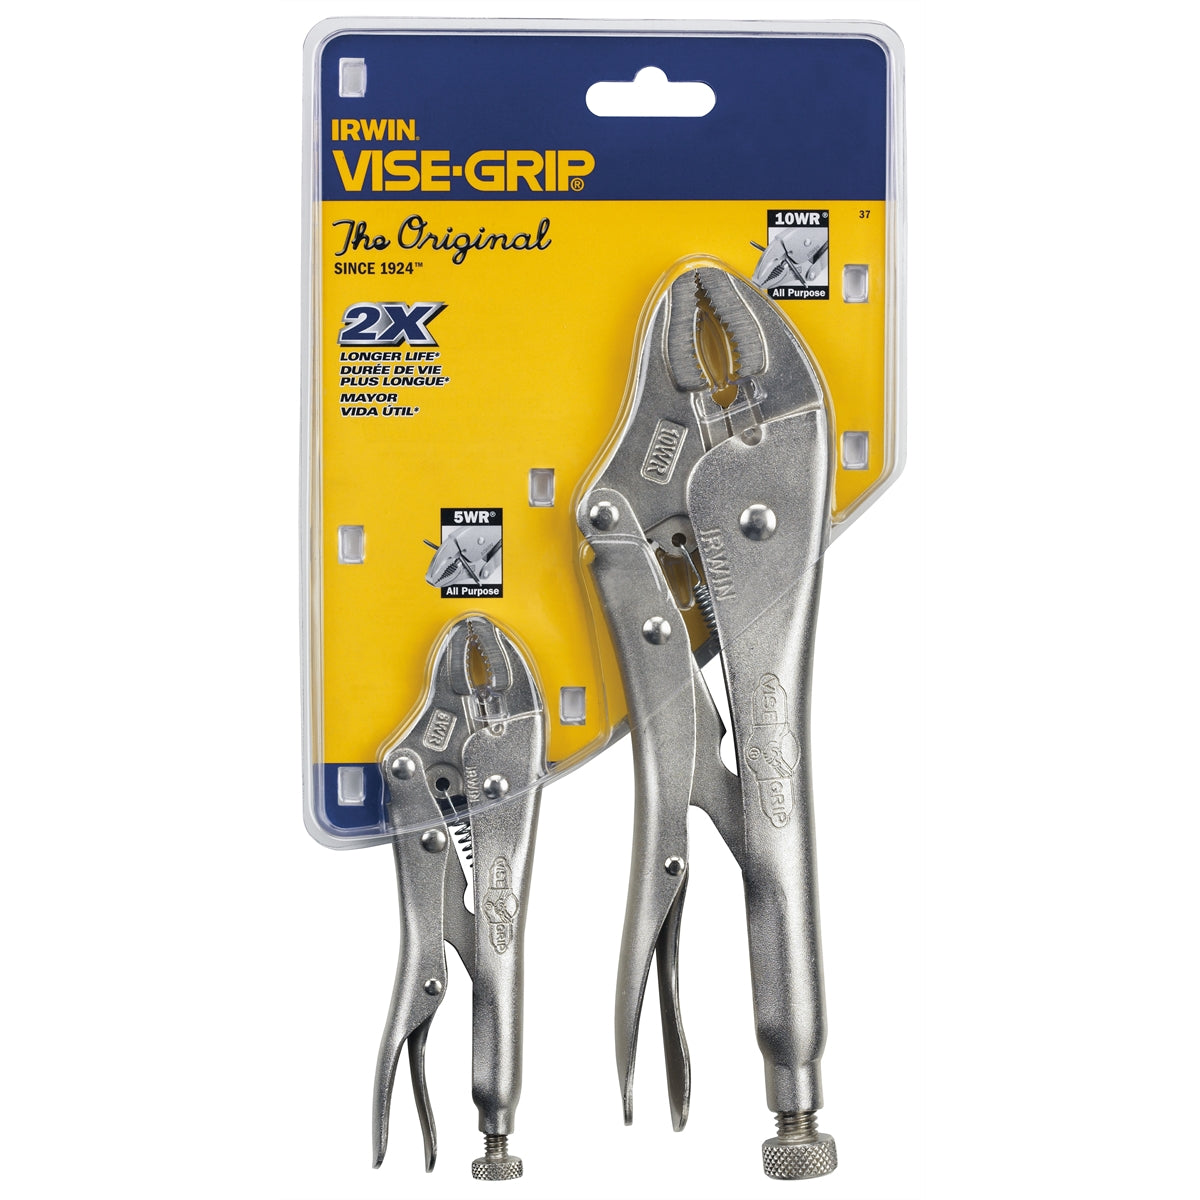 Vise Grip Locking Pliers Set, 2 Piece, Includes 10WR and 5WR